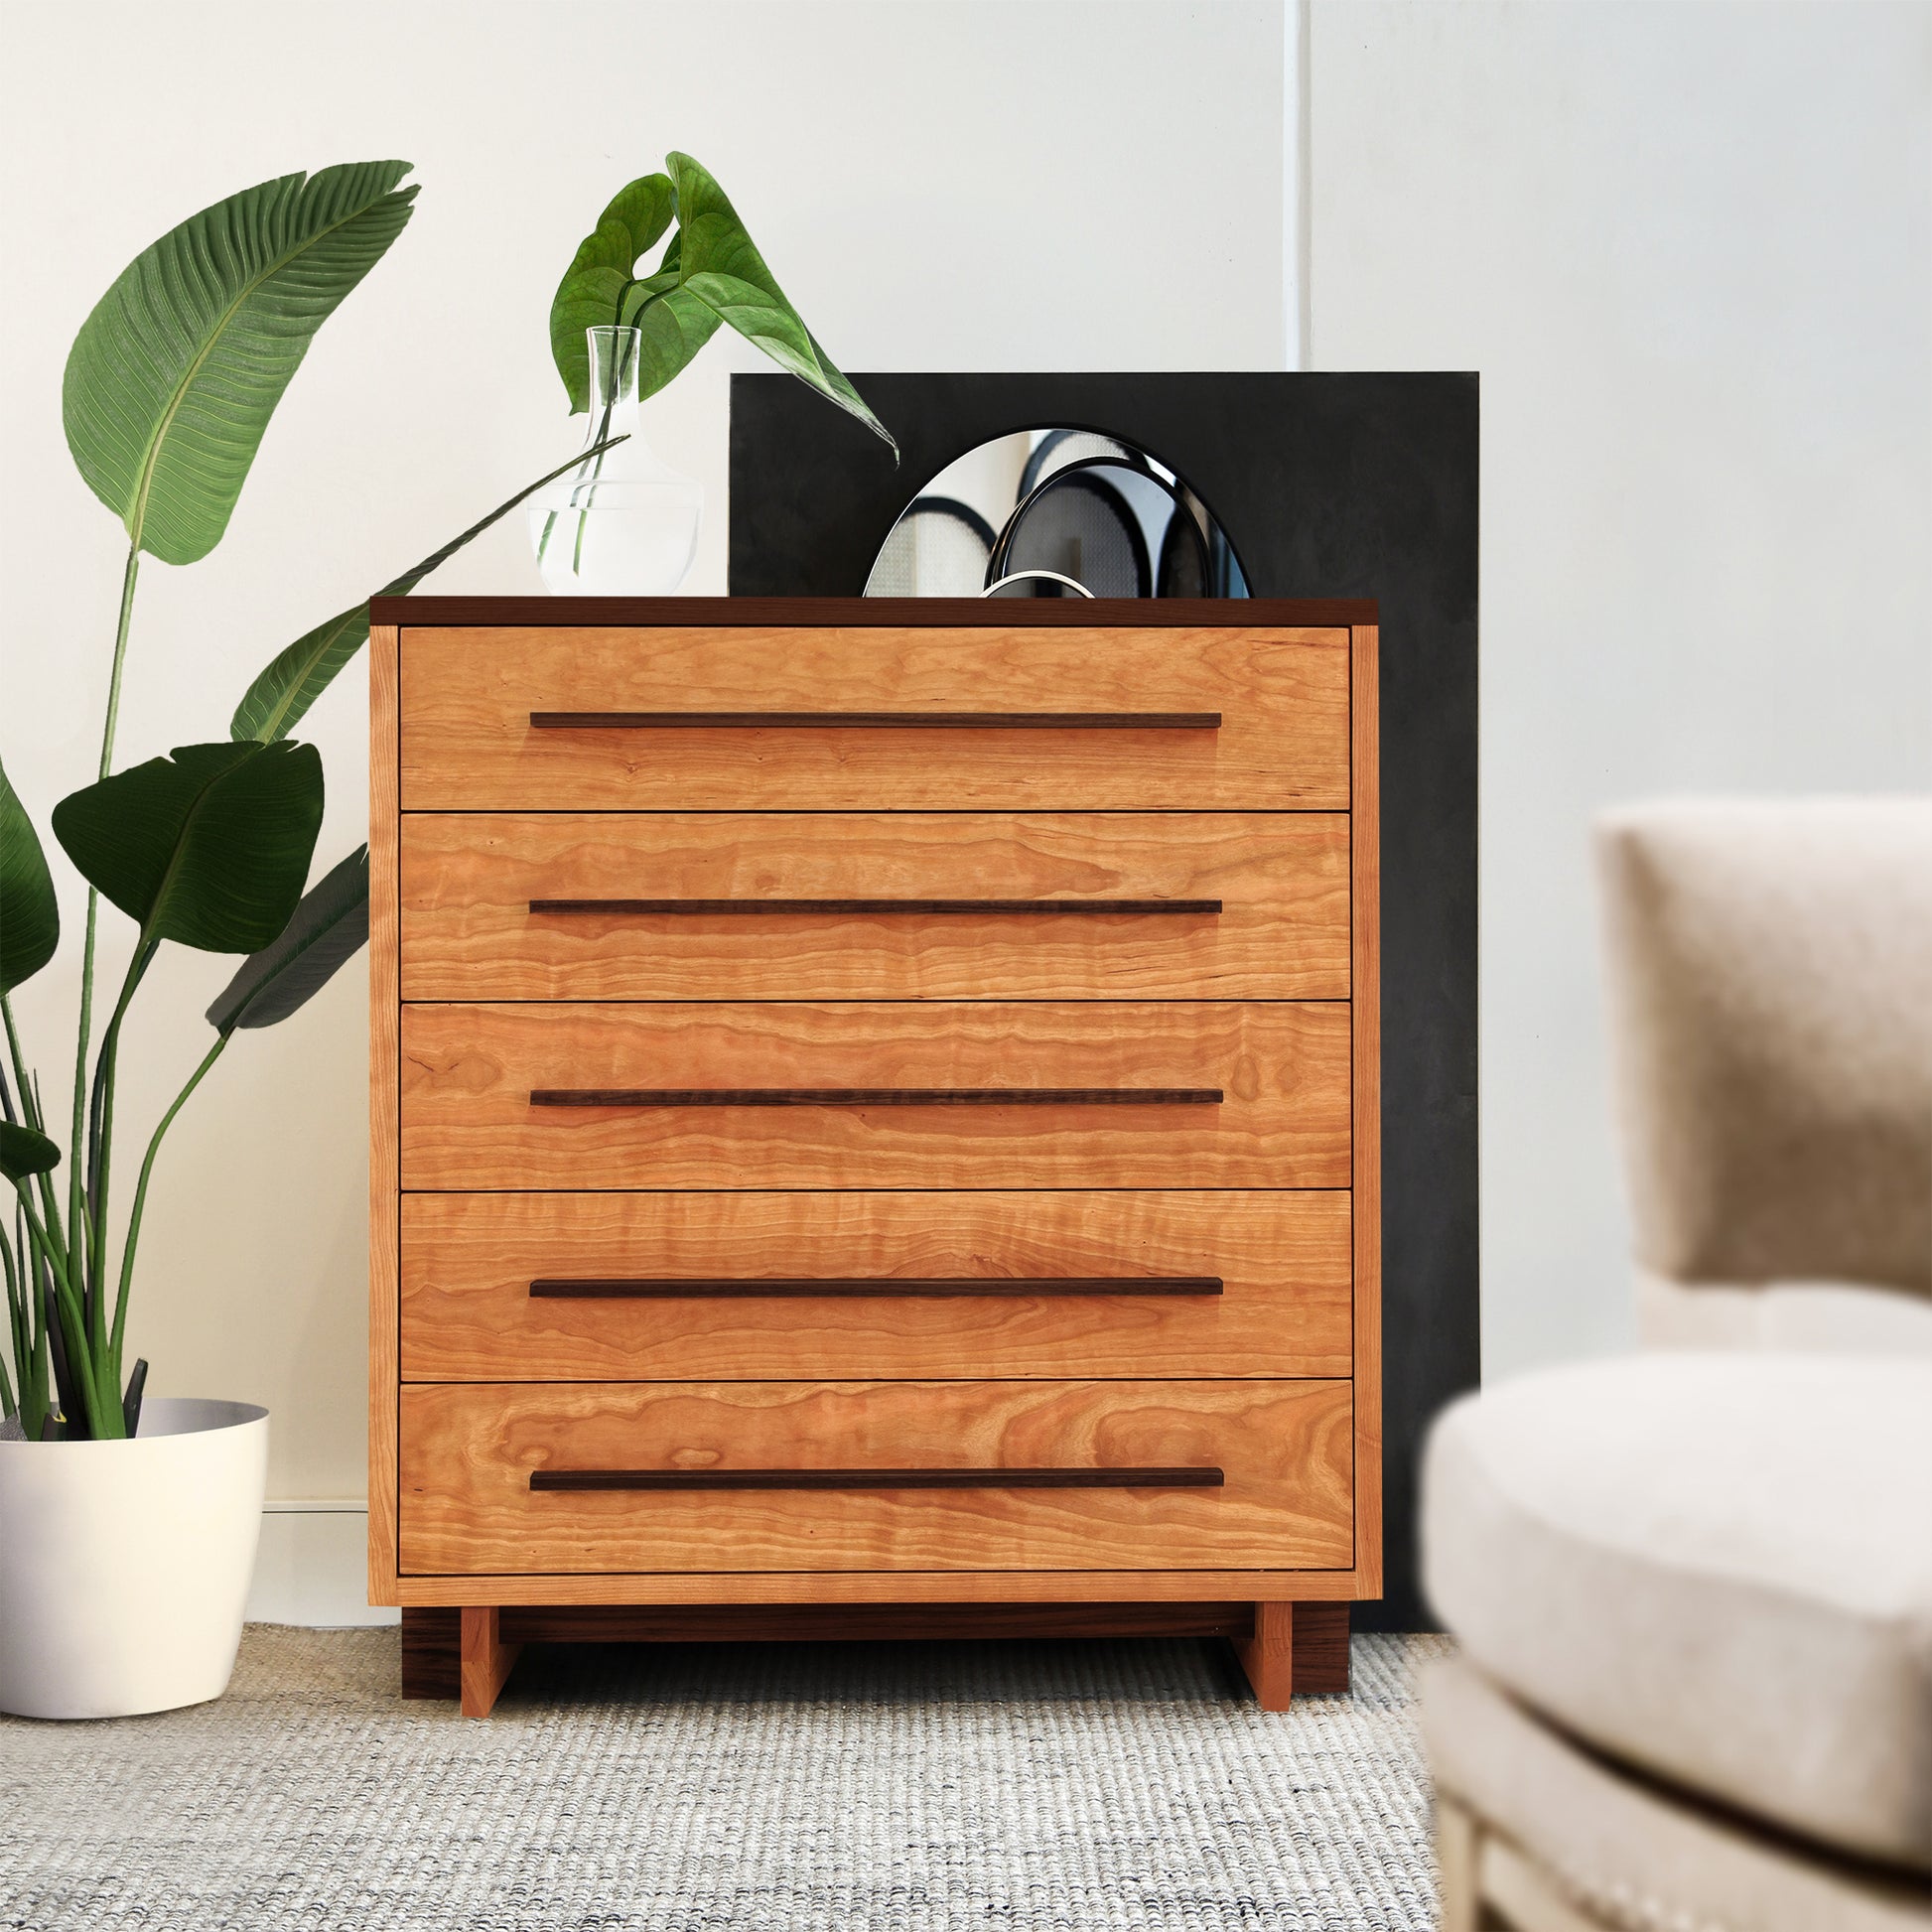 A Vermont Furniture Designs Modern American 5-Drawer Chest with curved handles in a minimalist room features an eco-friendly oil finish. A potted plant and a black decorative element are visible behind the dresser. Part of a beige chair appears in